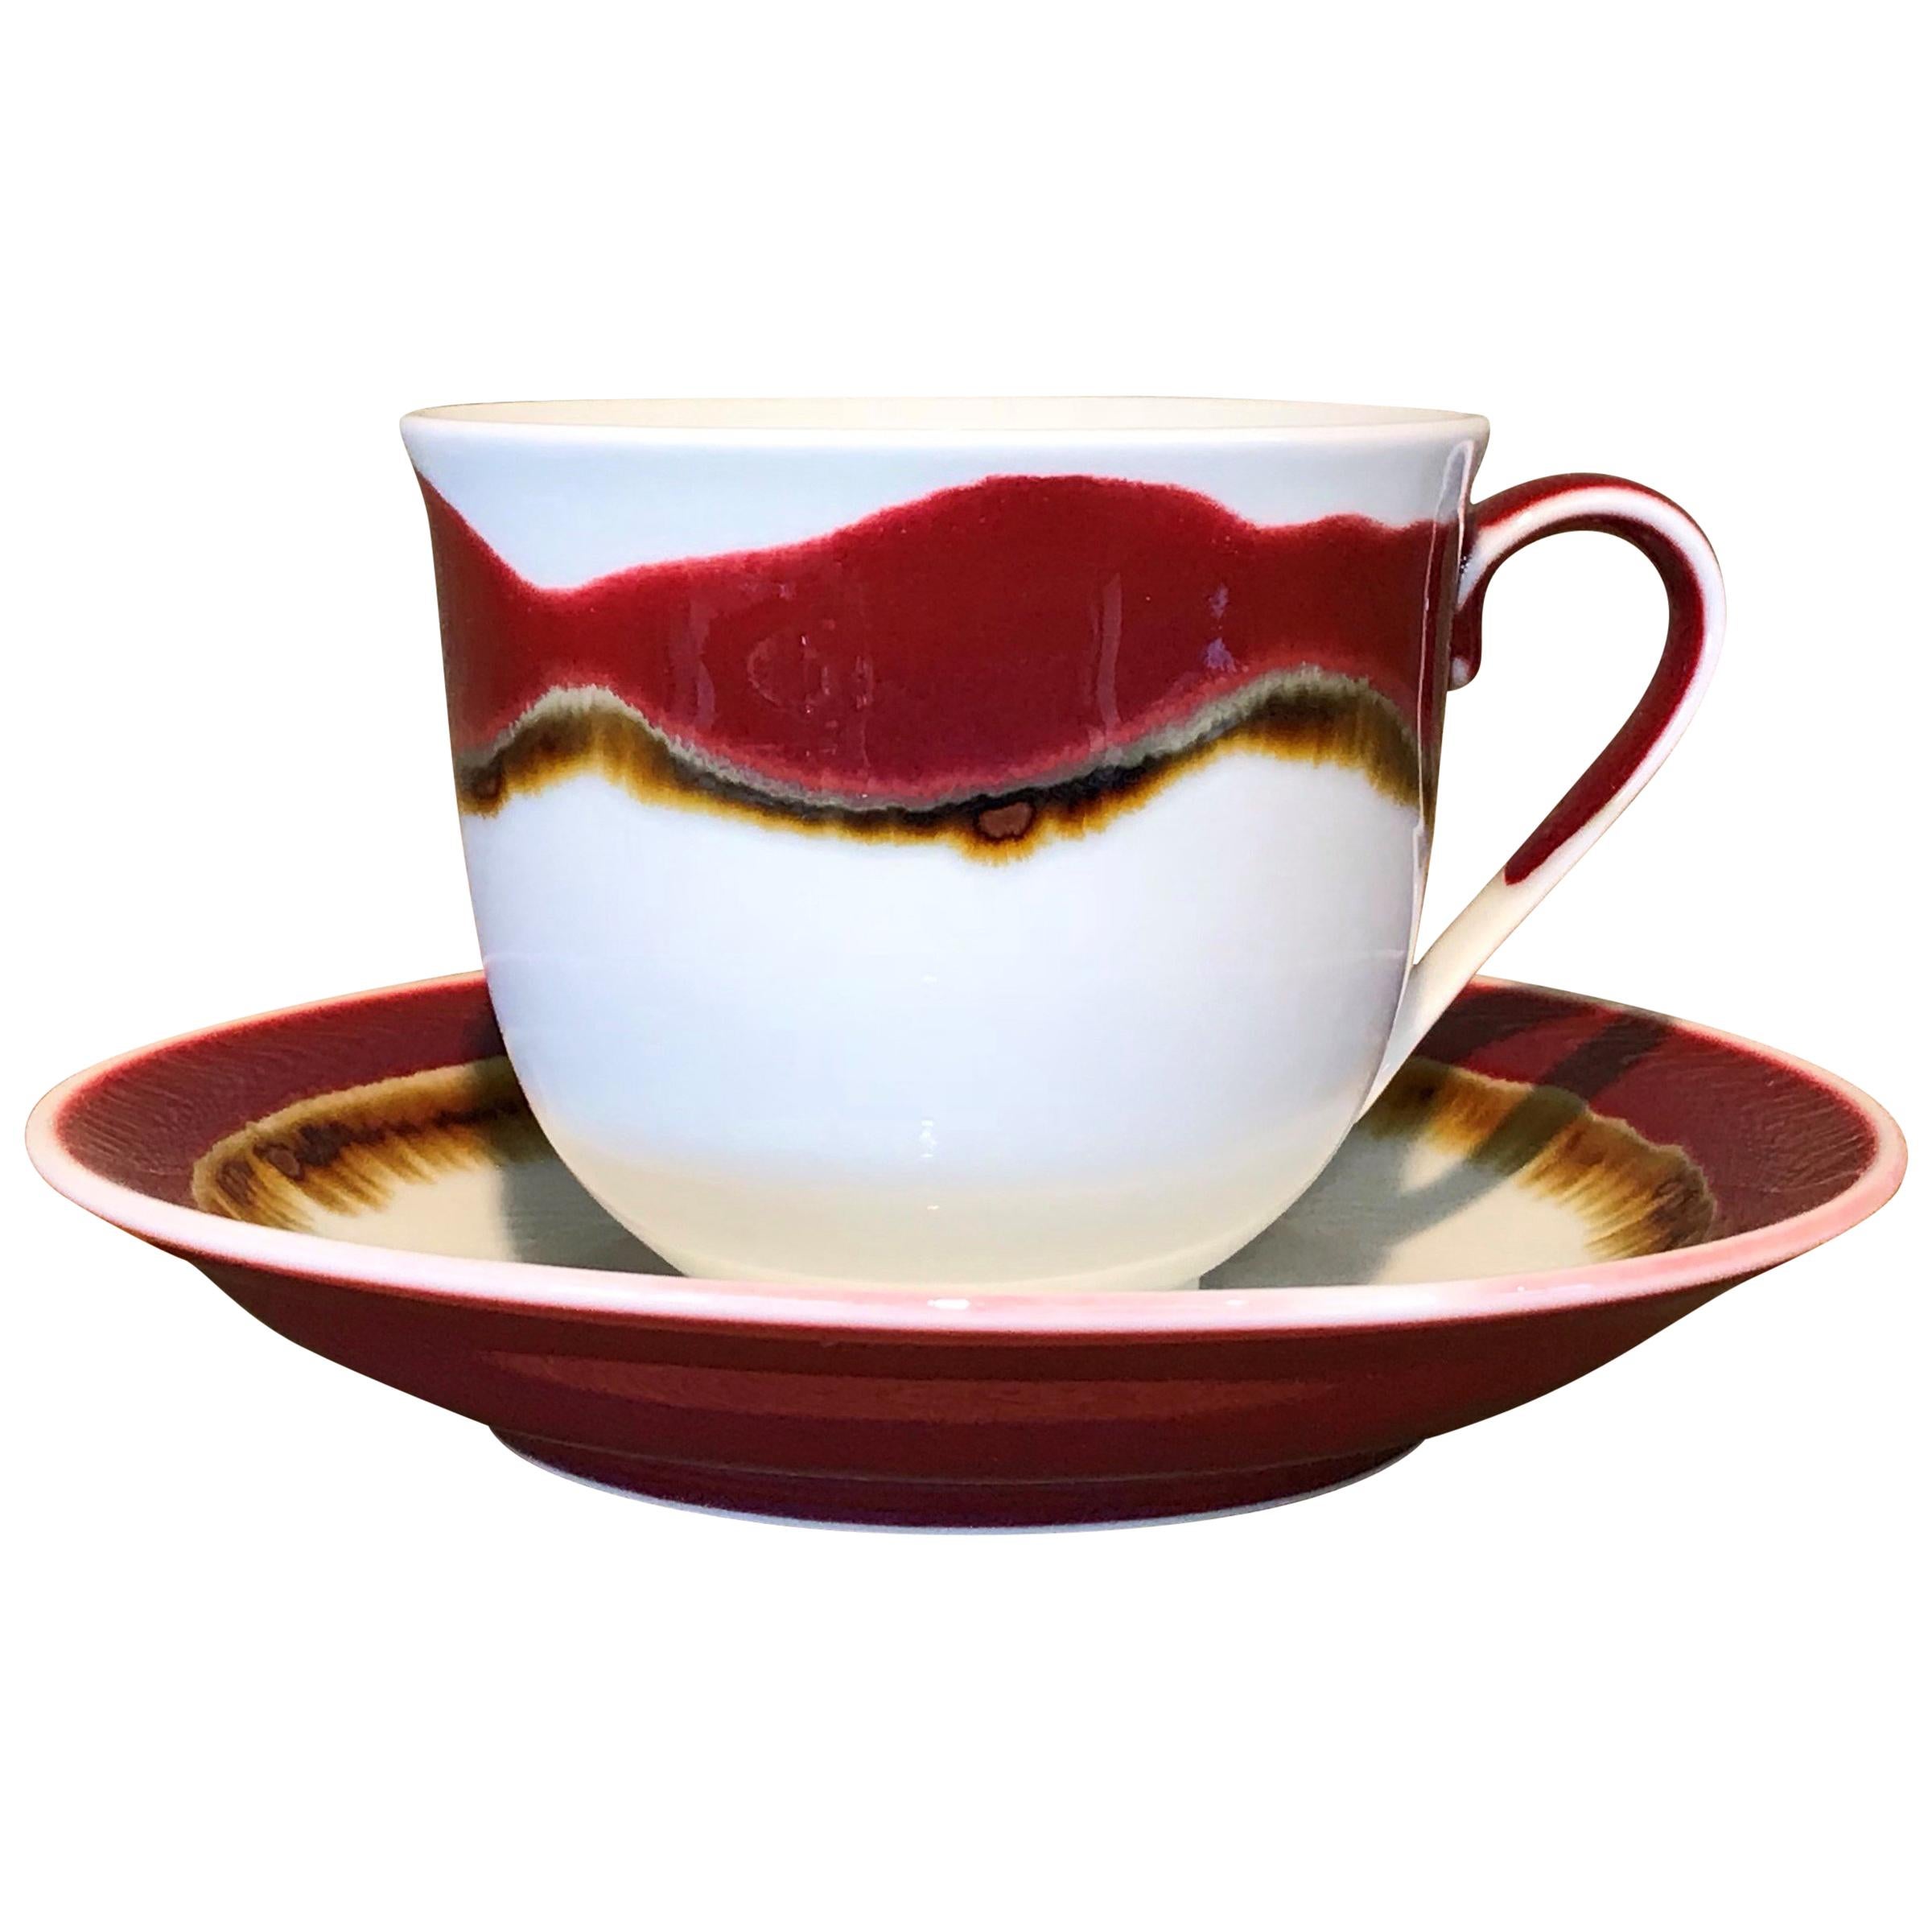 Japanese Red White Hand-Glazed Porcelain Cup and Saucer by Master Artist, 2018